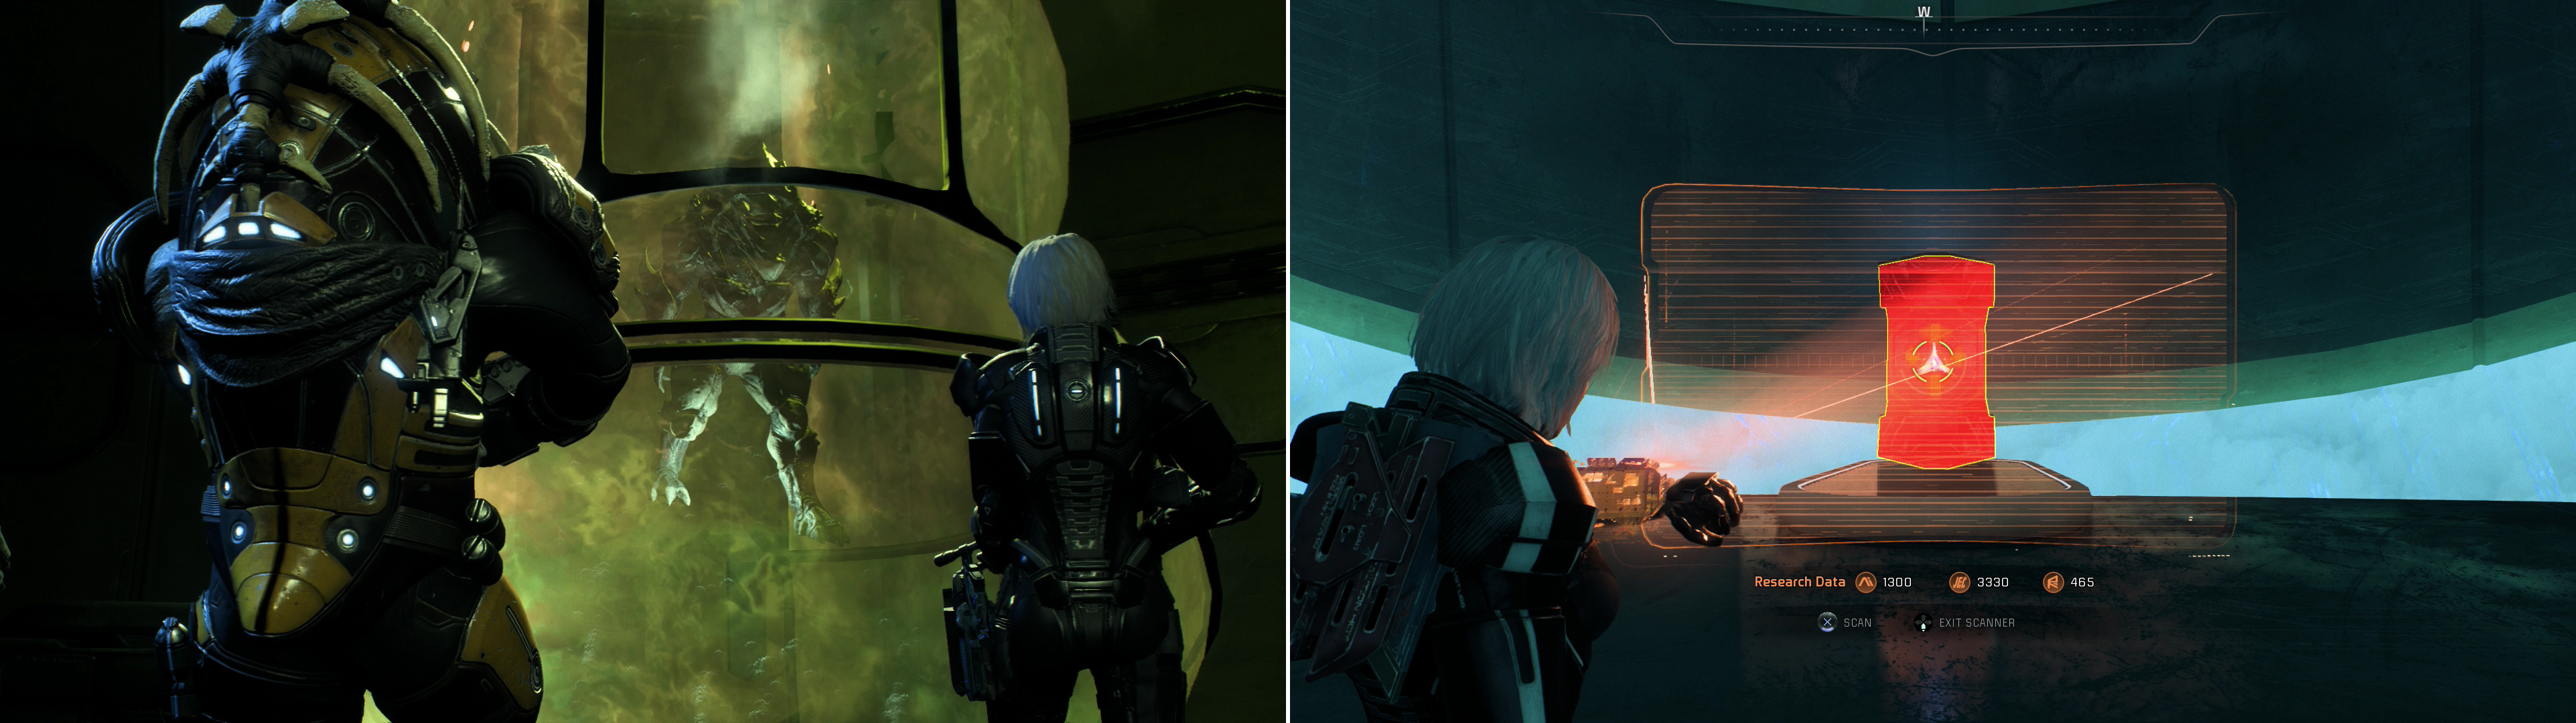 Near the Archons chamber youll find proof that the Kett have made dreadful progress towards exalting the Kett (left). Theres plenty of ruined Remnant artifacts in the Archons chamber, but youre looking for an intact artifact, which holds the information you need (right).